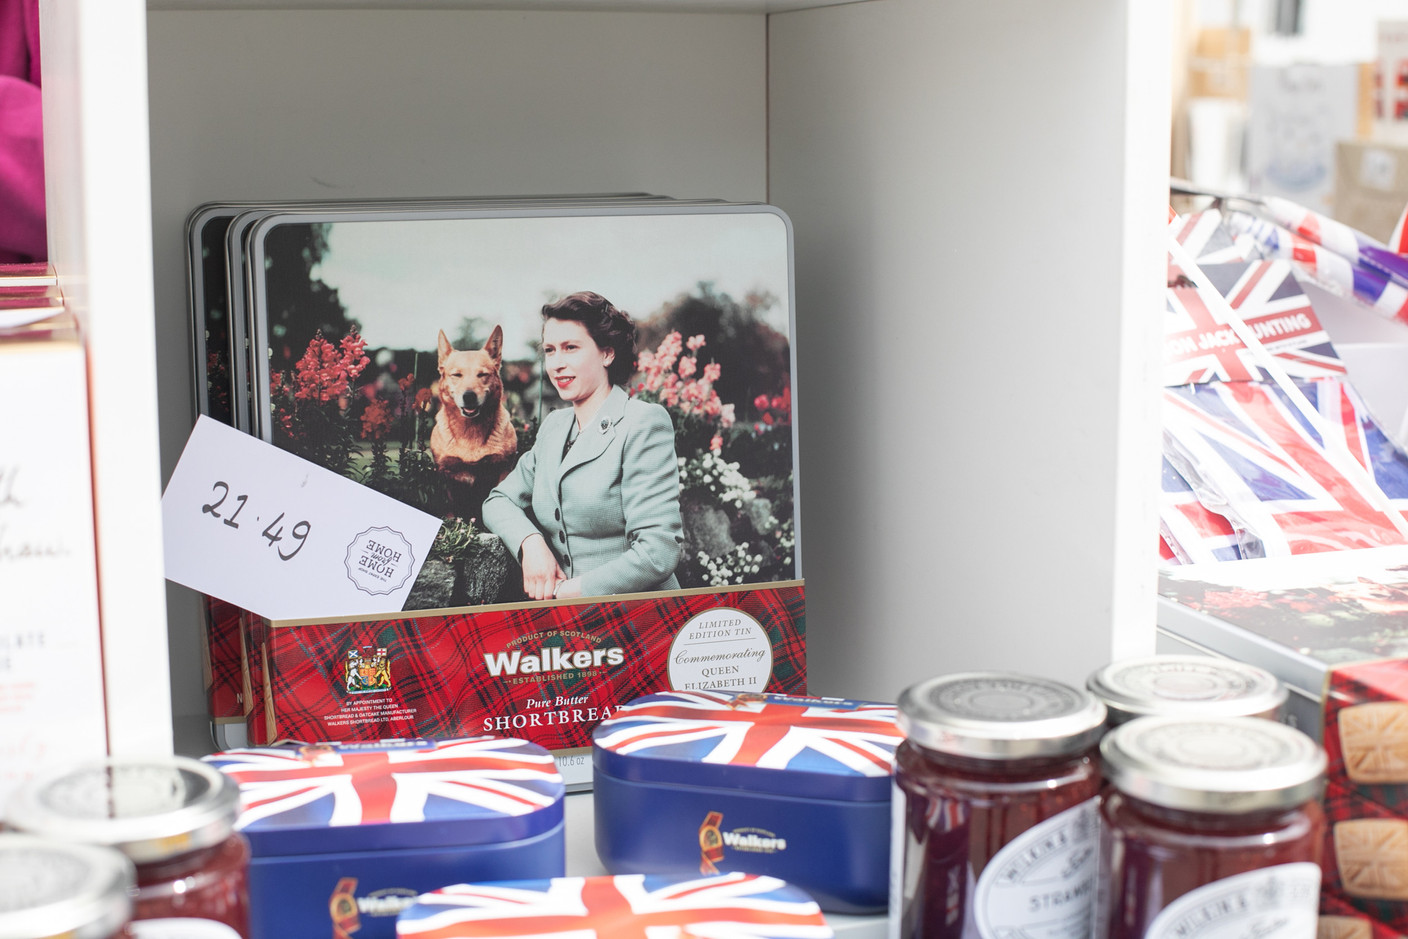 British souvenirs on display during the screening of the coronation of King Charles III and Queen Camilla. Photo: Matic Zorman / Maison Moderne